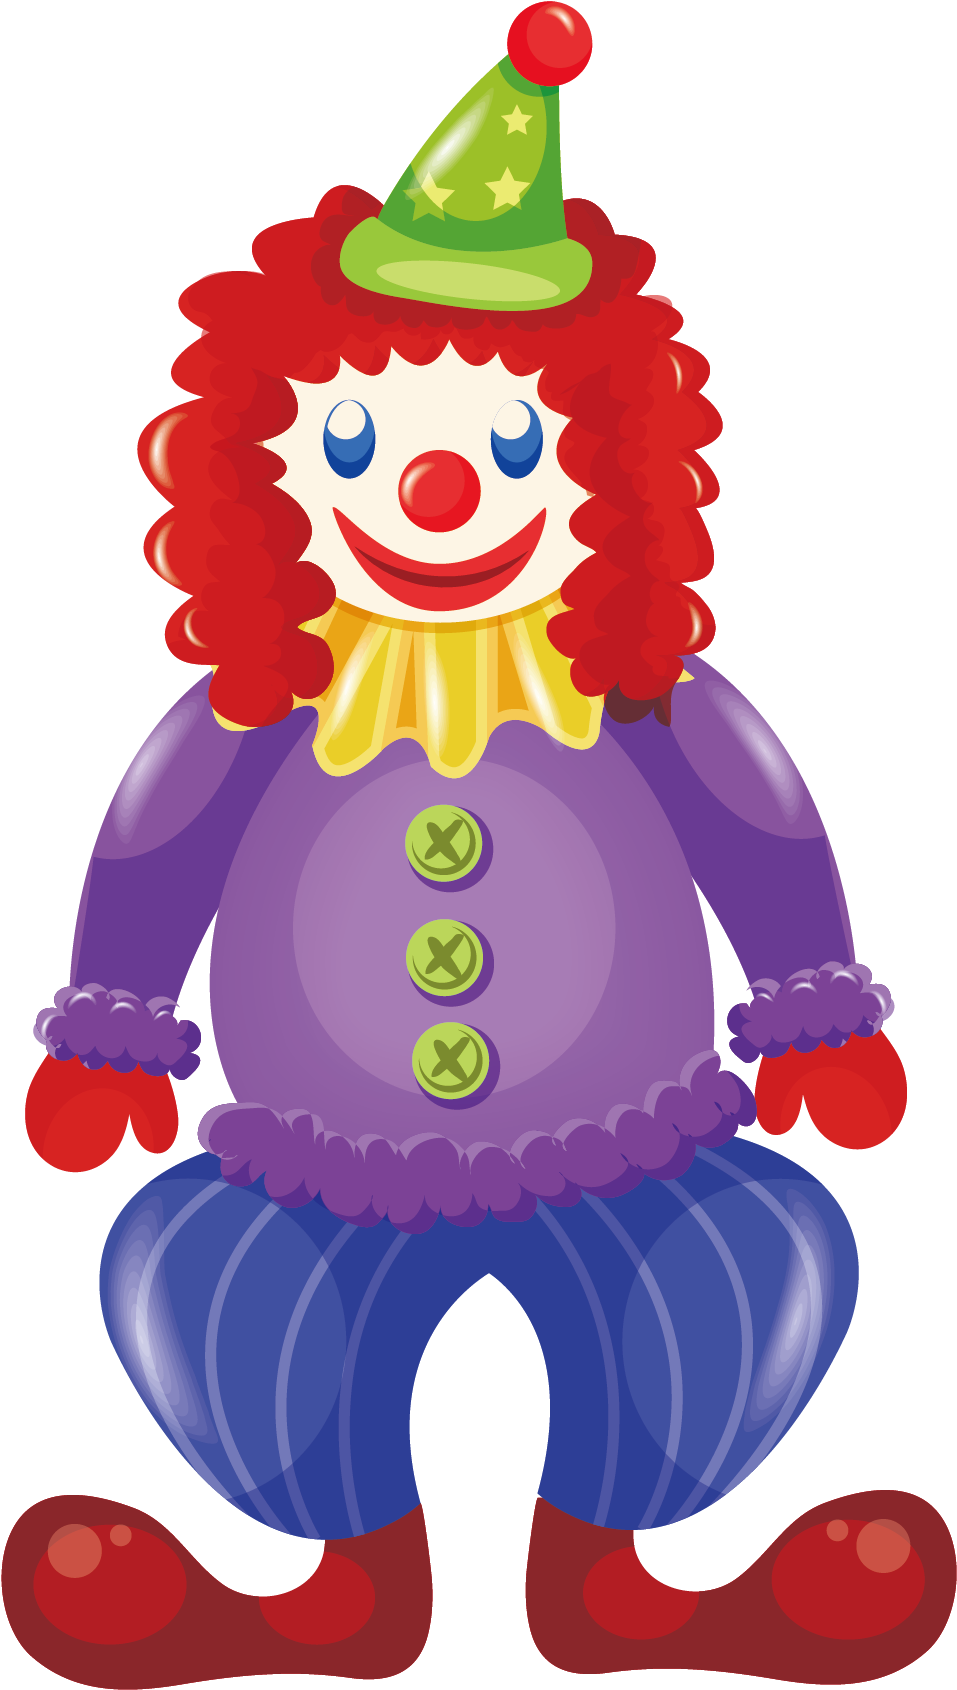 Colorful Cartoon Clown Illustration PNG